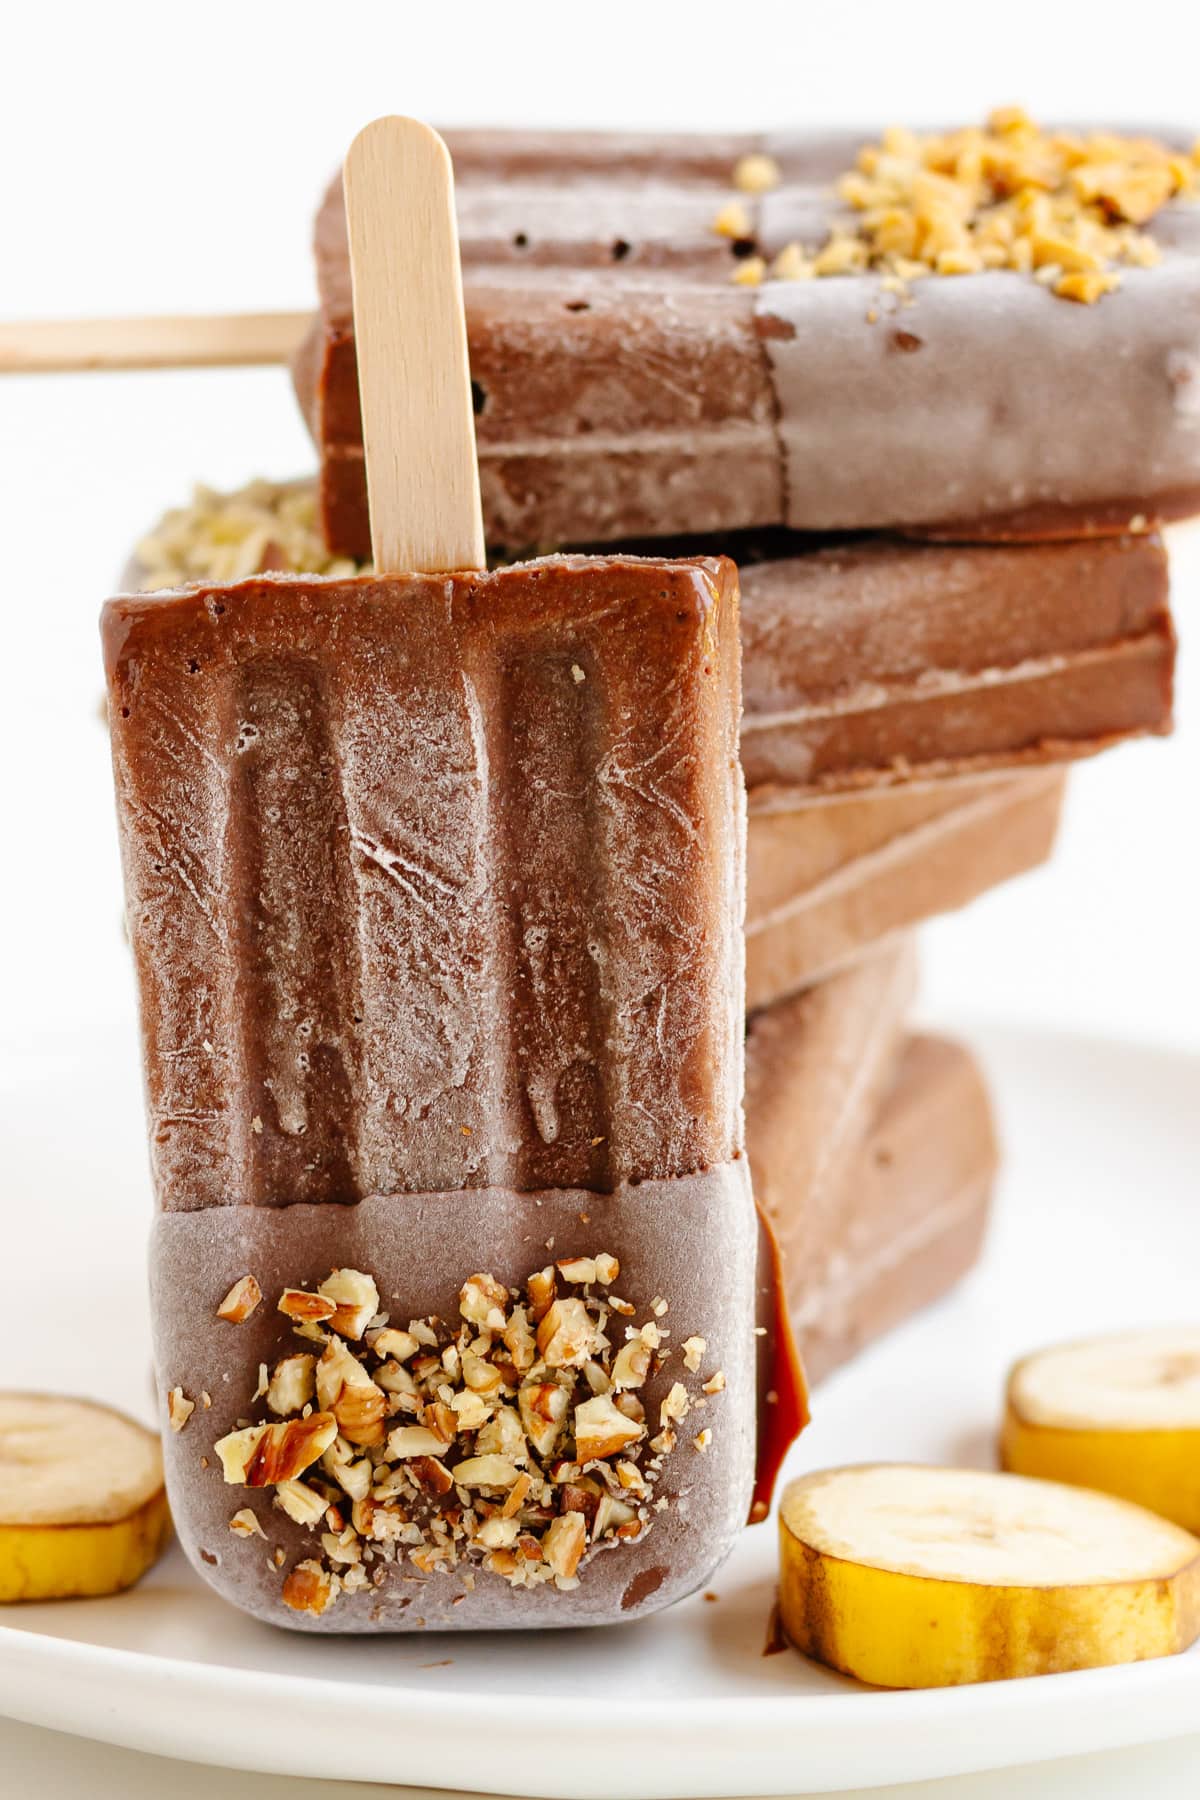 Chocolate banana popsicle dipped in chocolate and chopped nuts leaning against a pile of popsicles.